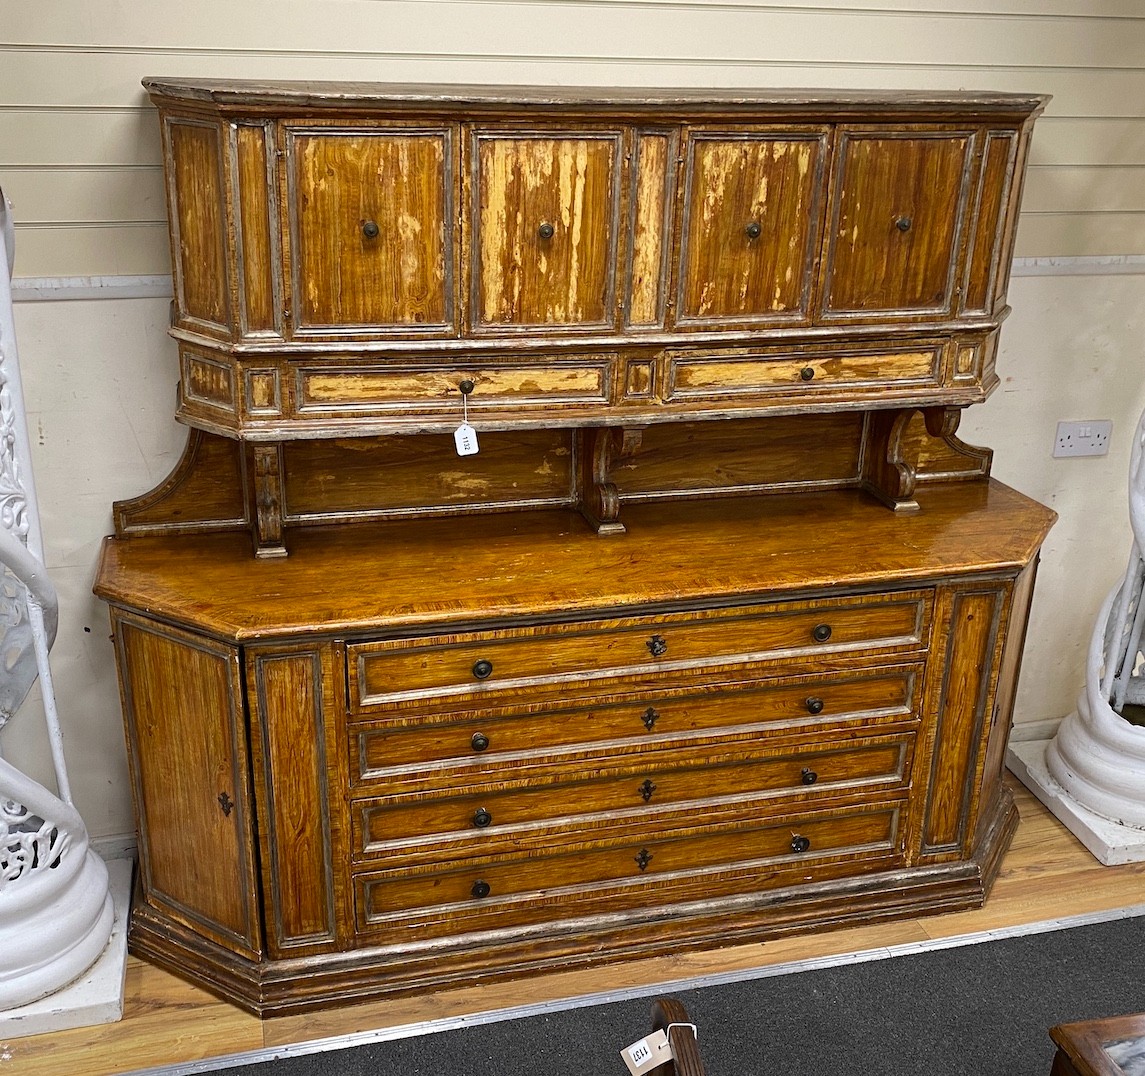 A late 18th/early 19th century French wood grain painted pine buffet, height 168cm, width 202cm, depth 52cm